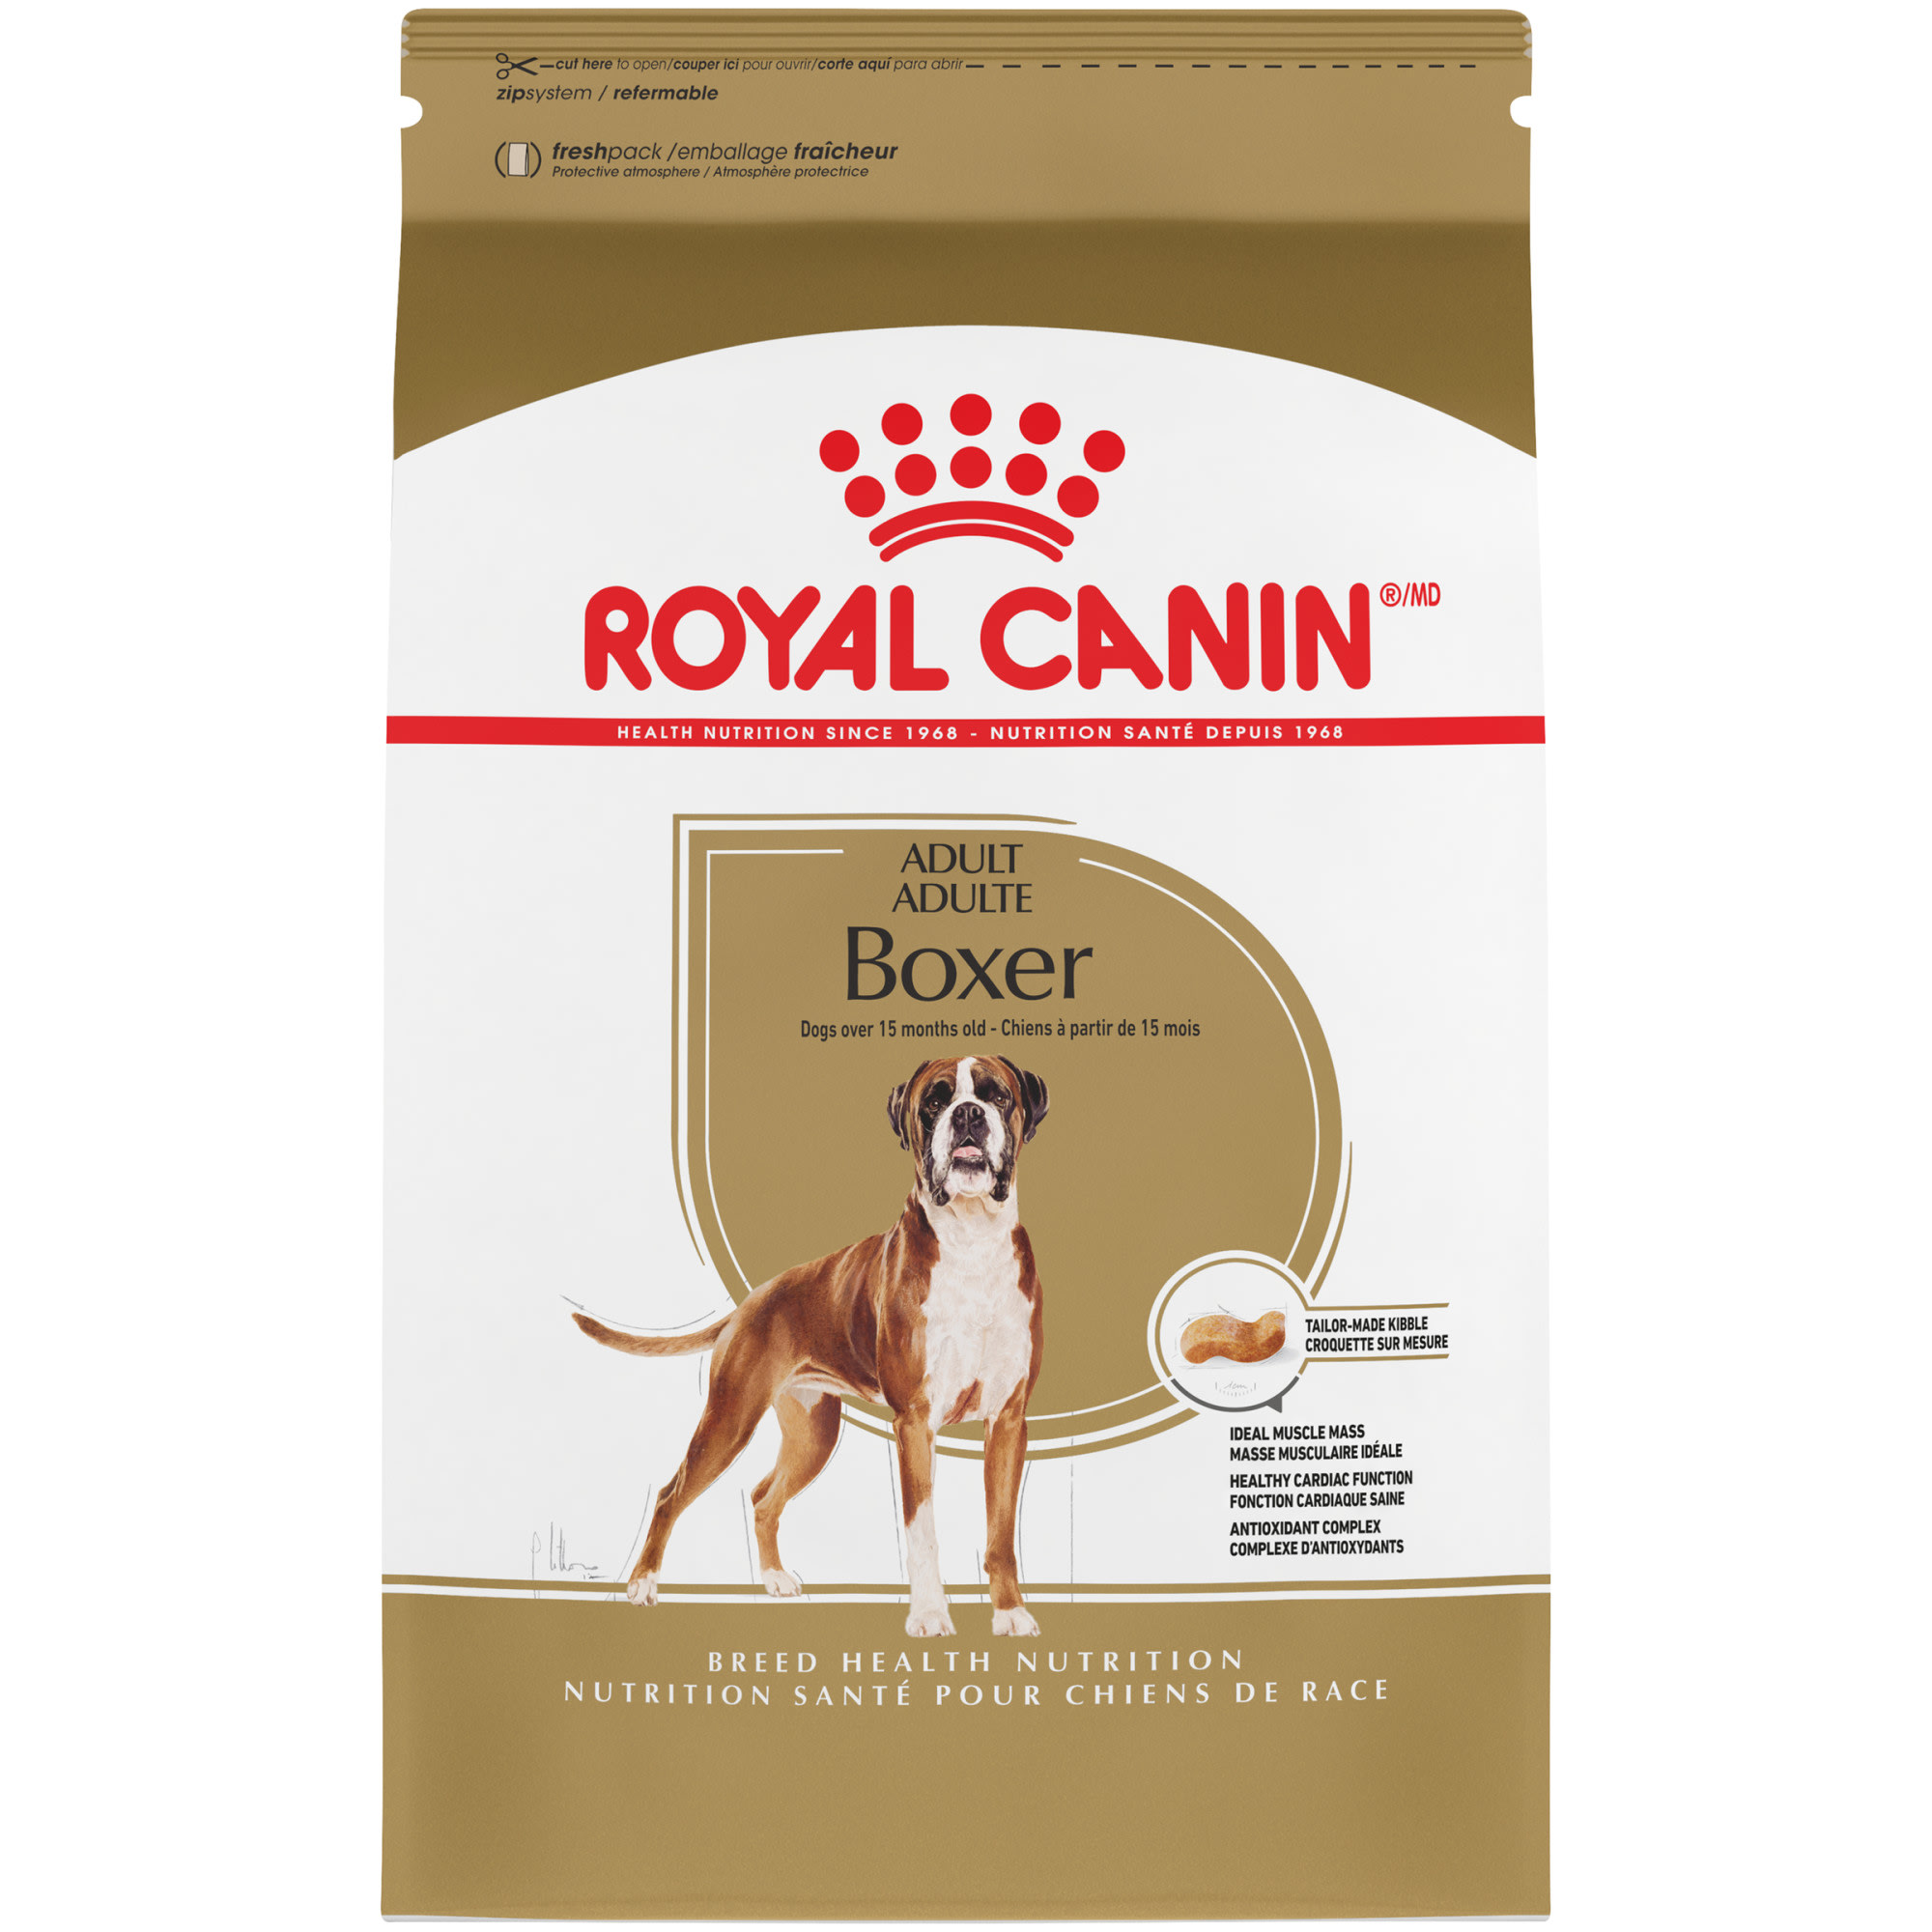 Royal Canin Breed Health Nutrition Boxer Adult Dry Dog Food, 17 lbs.